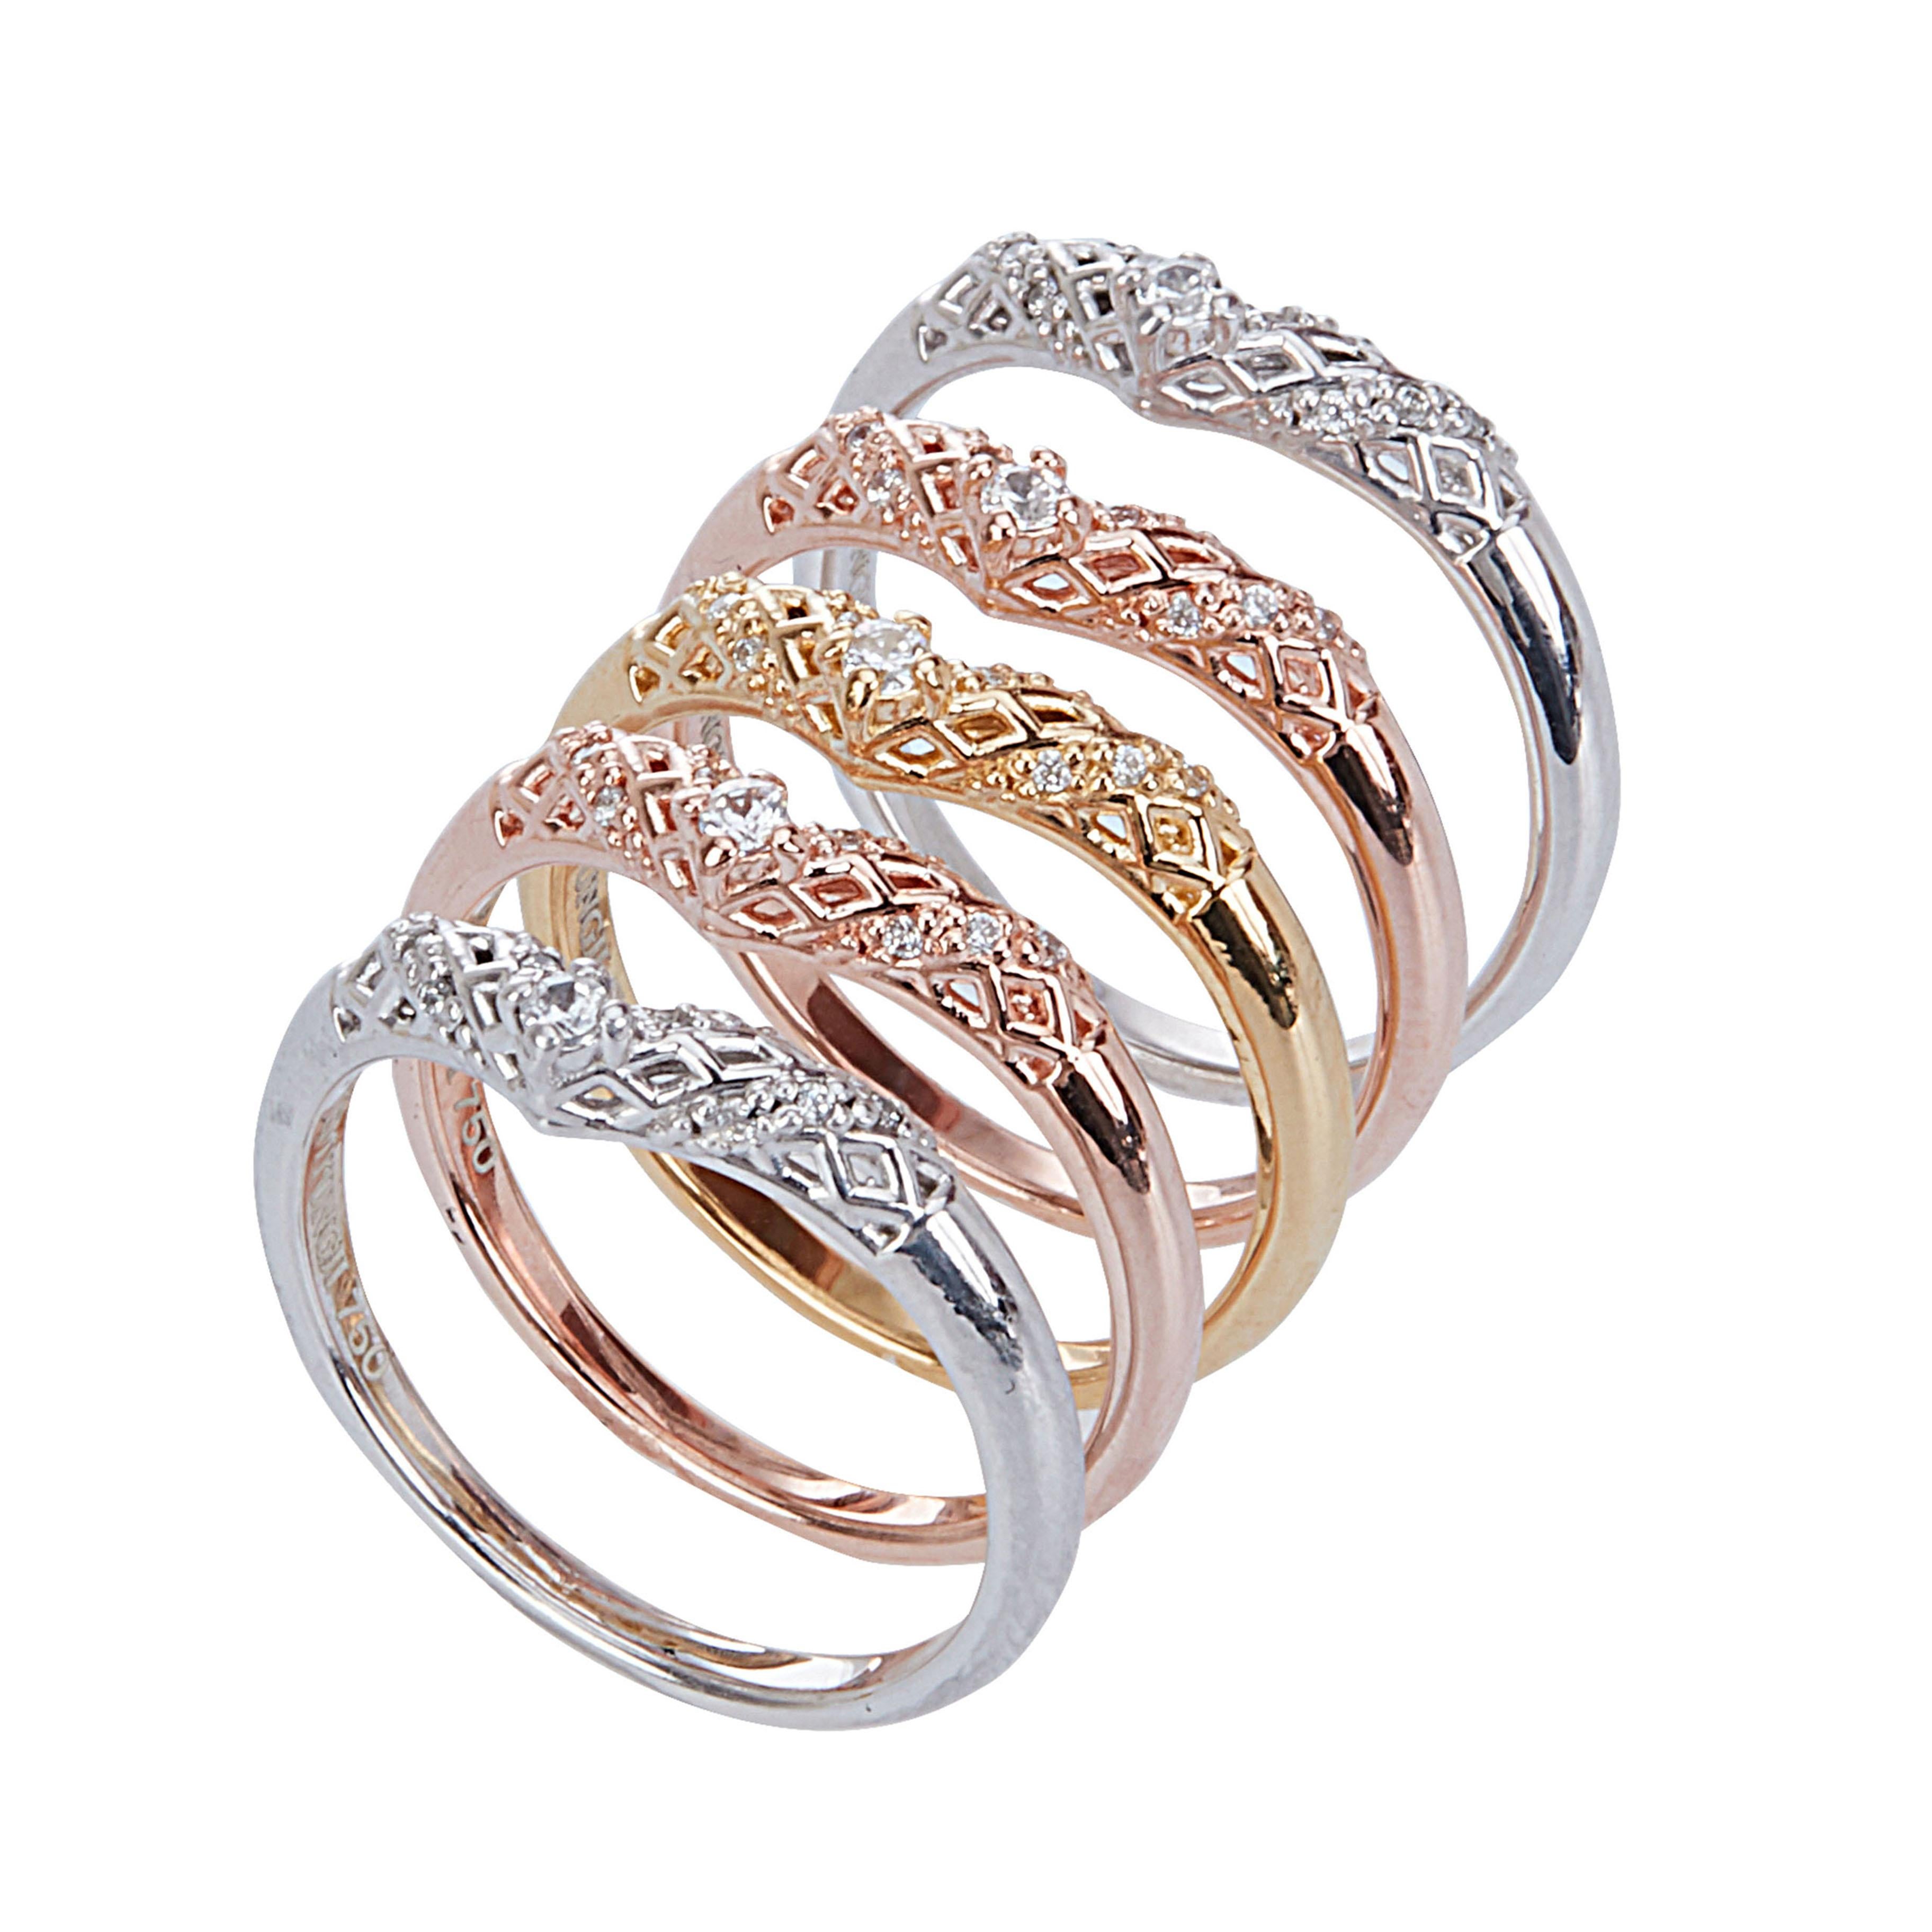 Numerous diamonds and white, yellow, and pink gold colors make a perfect combination to create a variety of looks depending on the wearer's layering. Glowing diamonds are set with her meshwork, adding dignity and delicacy to this unique